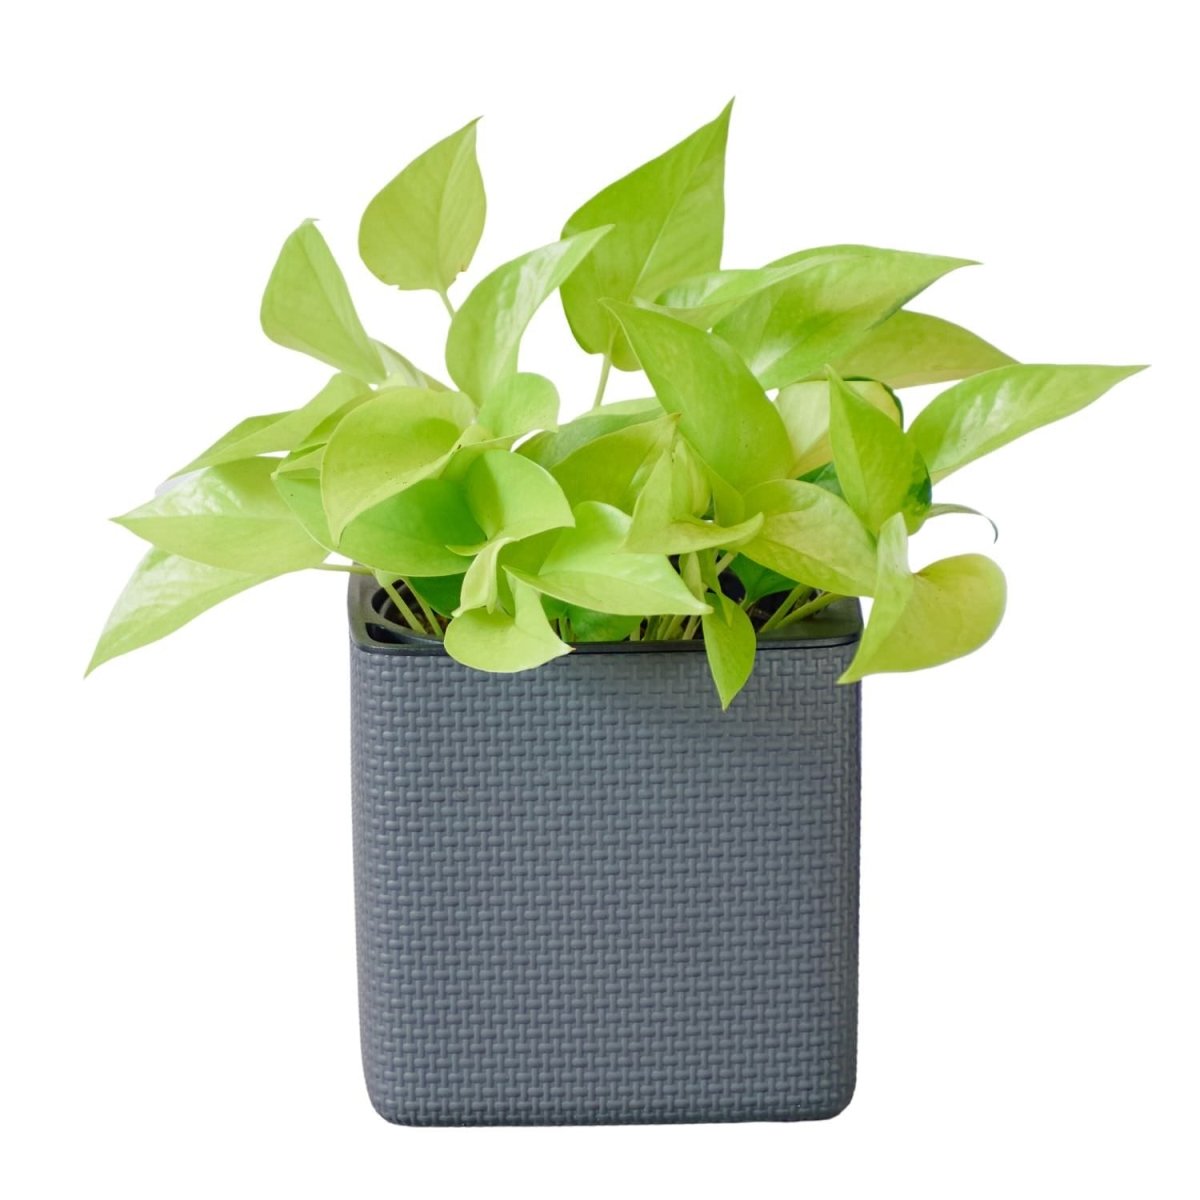 Pothos Neon Placed In Lechuza Cube 16 Planter - Slate - My City Plants